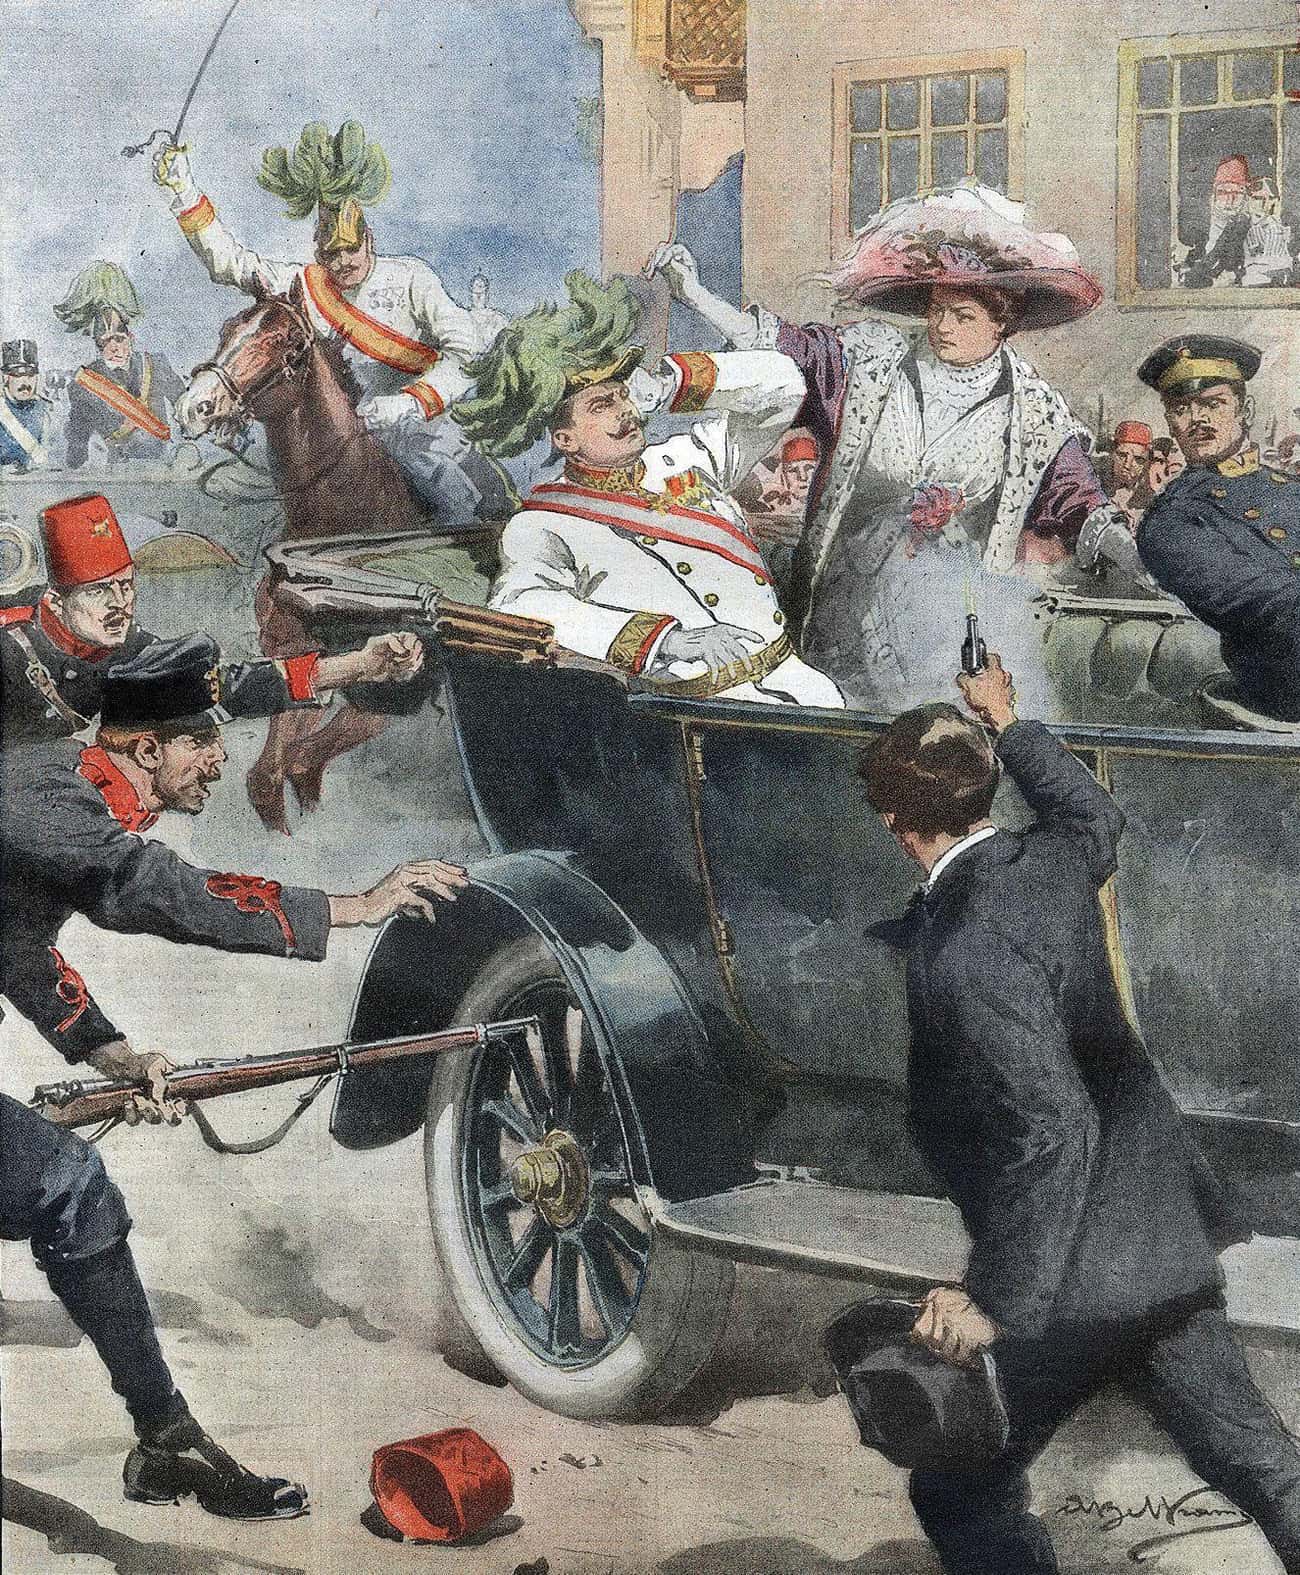 The Assassination Of One Man Led To One Of The Biggest, Bloodiest Wars In Human History